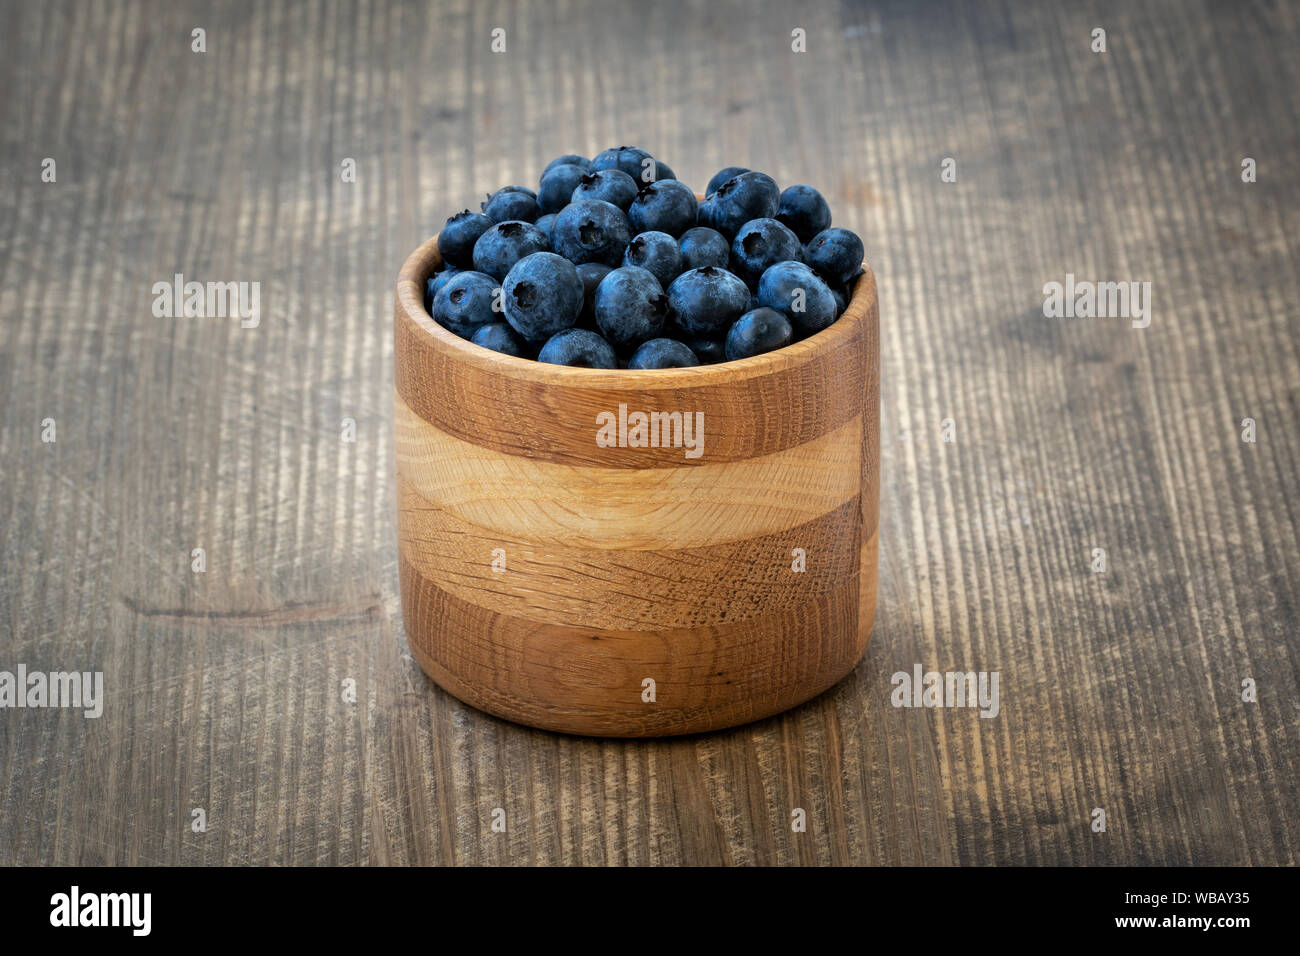 Freshly picked blueberries in wooden bowl on wooden background. Healthy eating and nutrition. Stock Photo